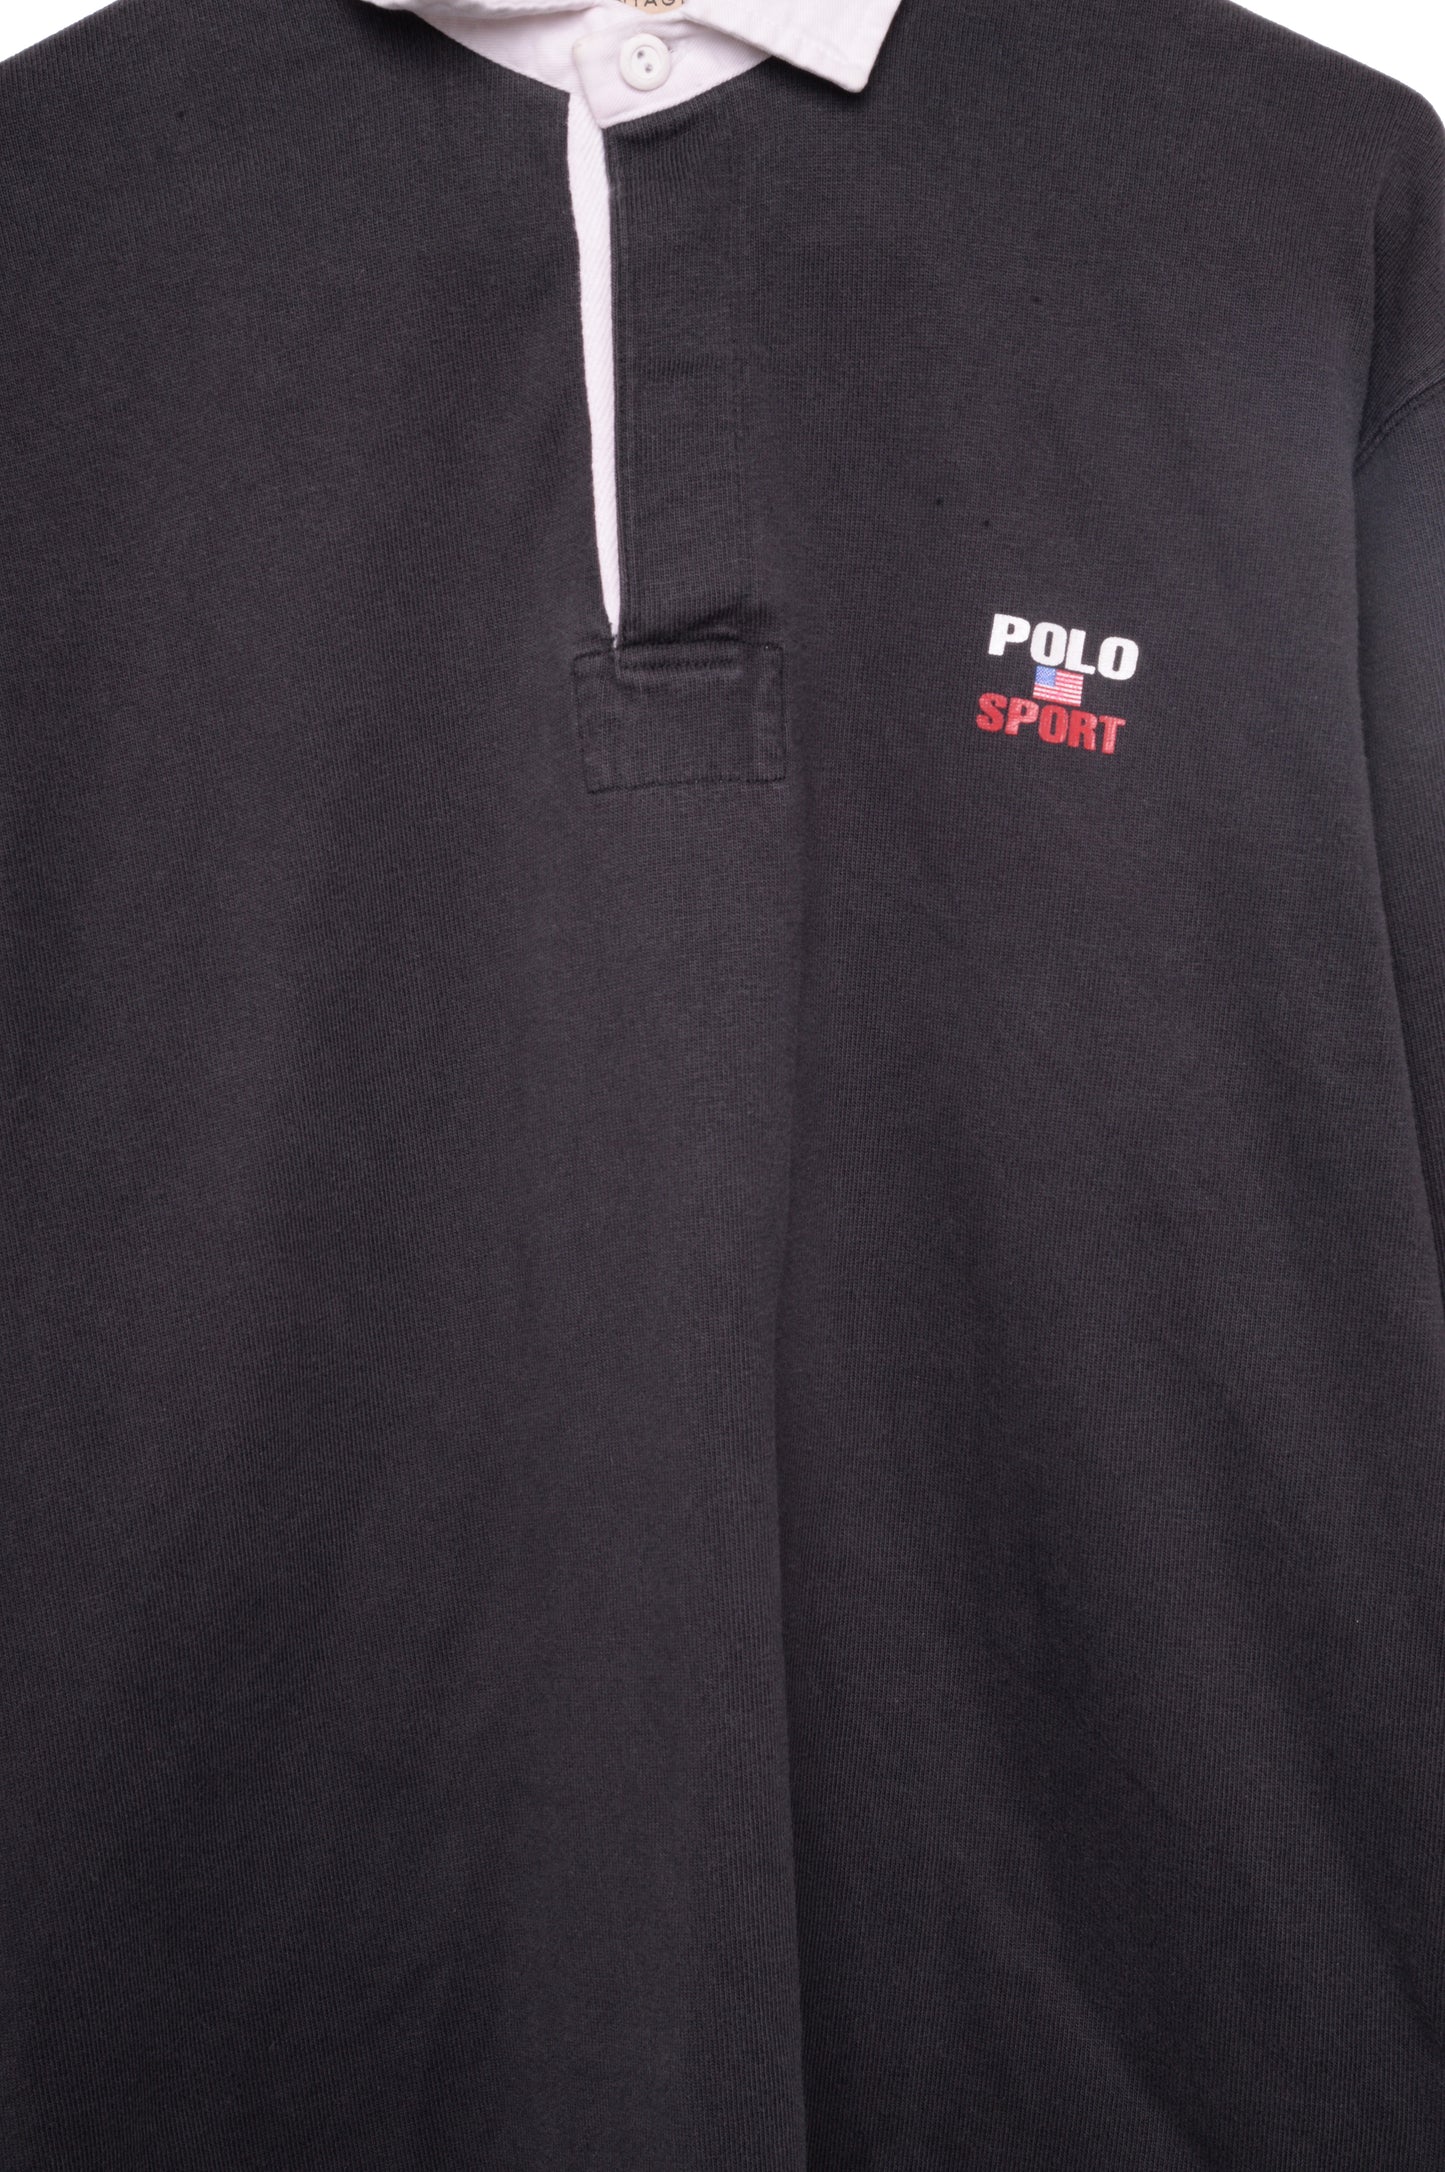 1990s Polo Sport Rugby Shirt